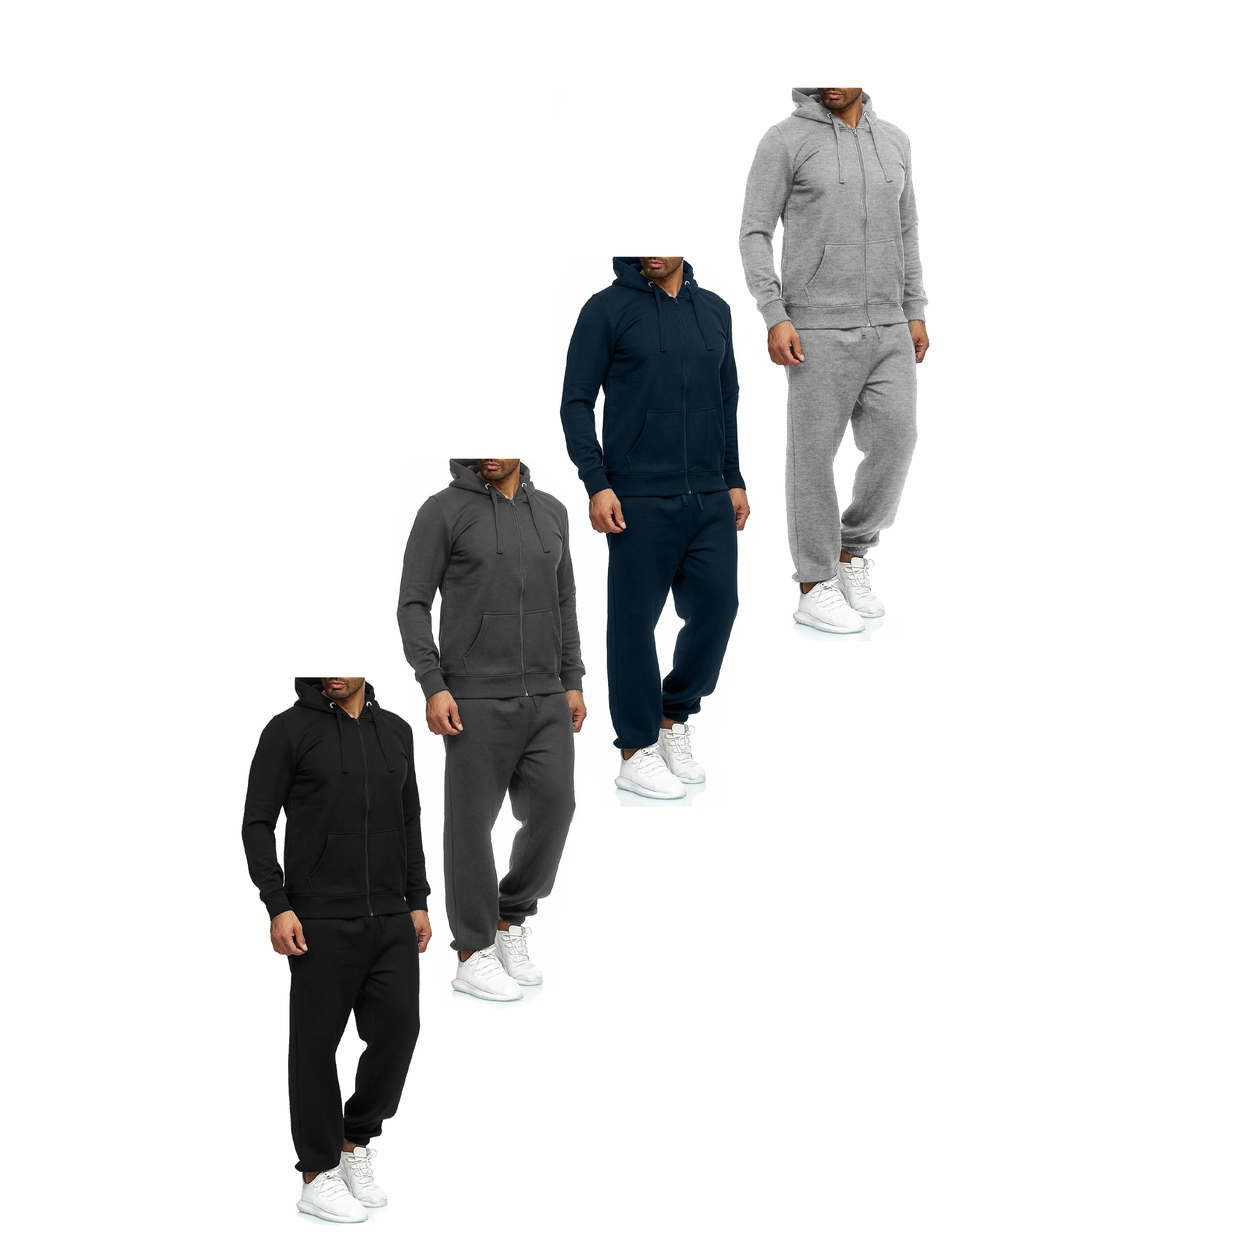 2-Pack: Men's Casual Big & Tall Athletic Active Winter Warm Fleece Lined Full Zip Tracksuit Jogger Set - Black, X-large